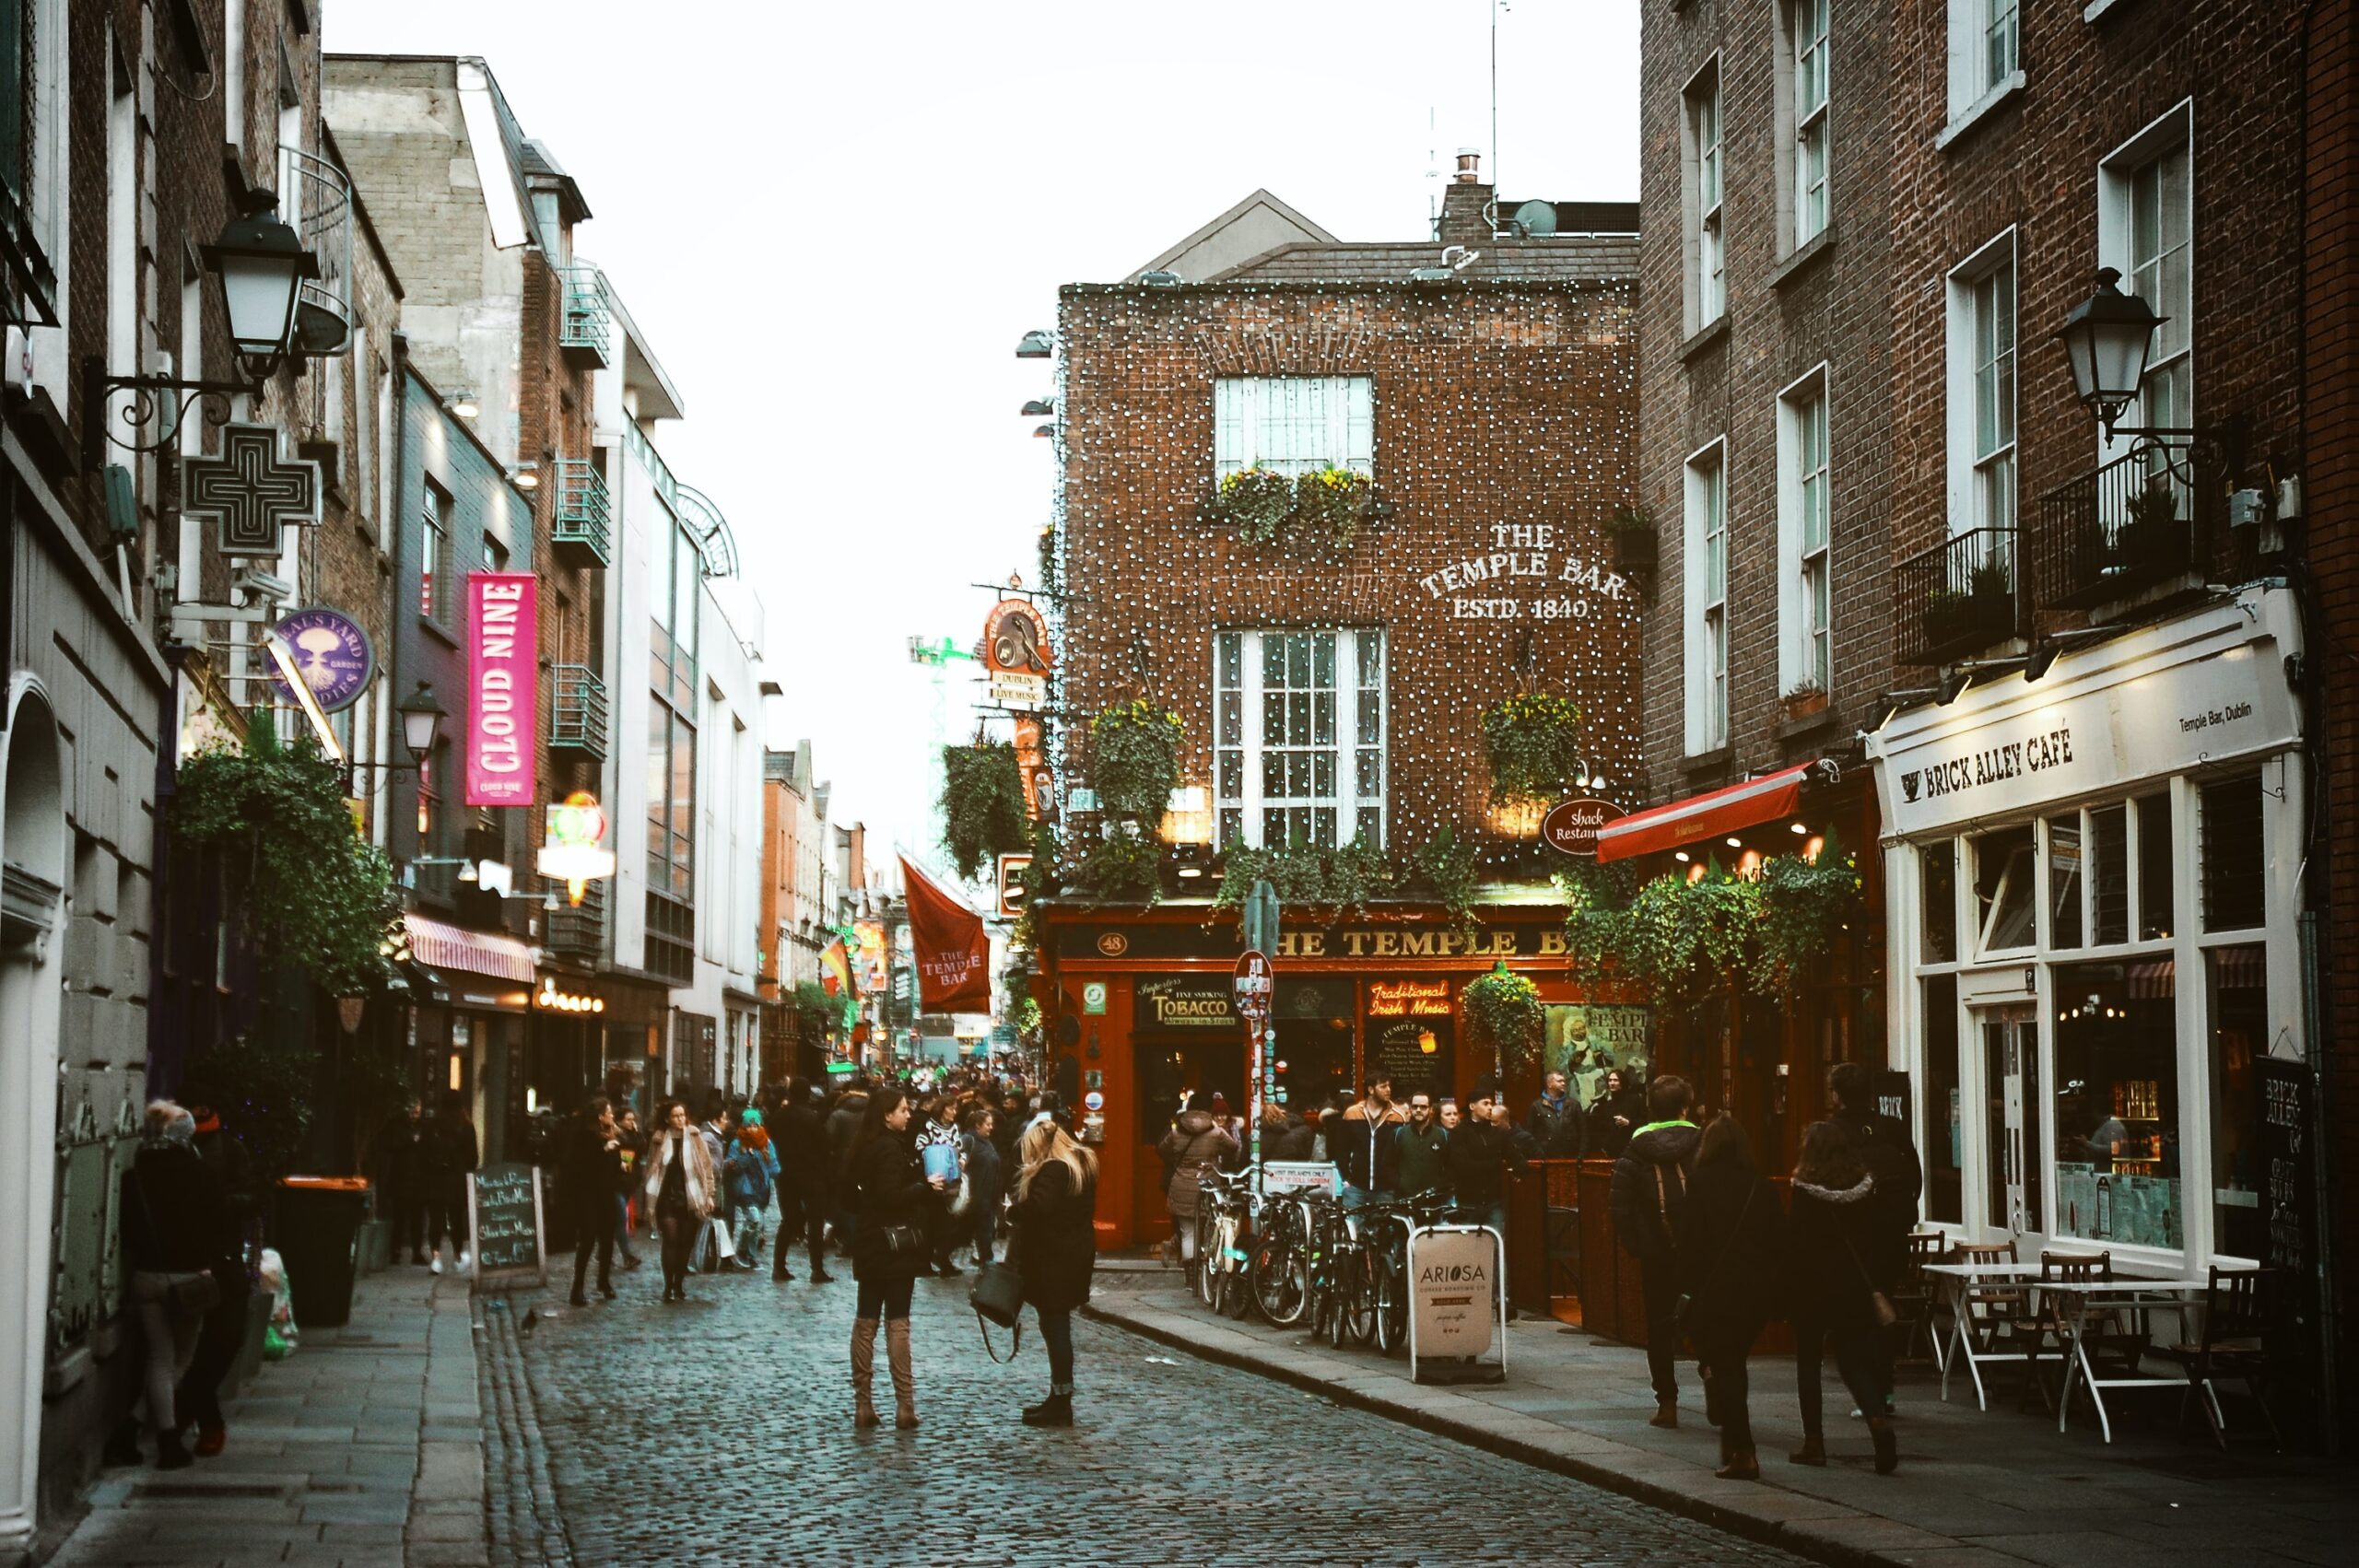 With this Ireland Travel Guide you will discover the best spots in Ireland